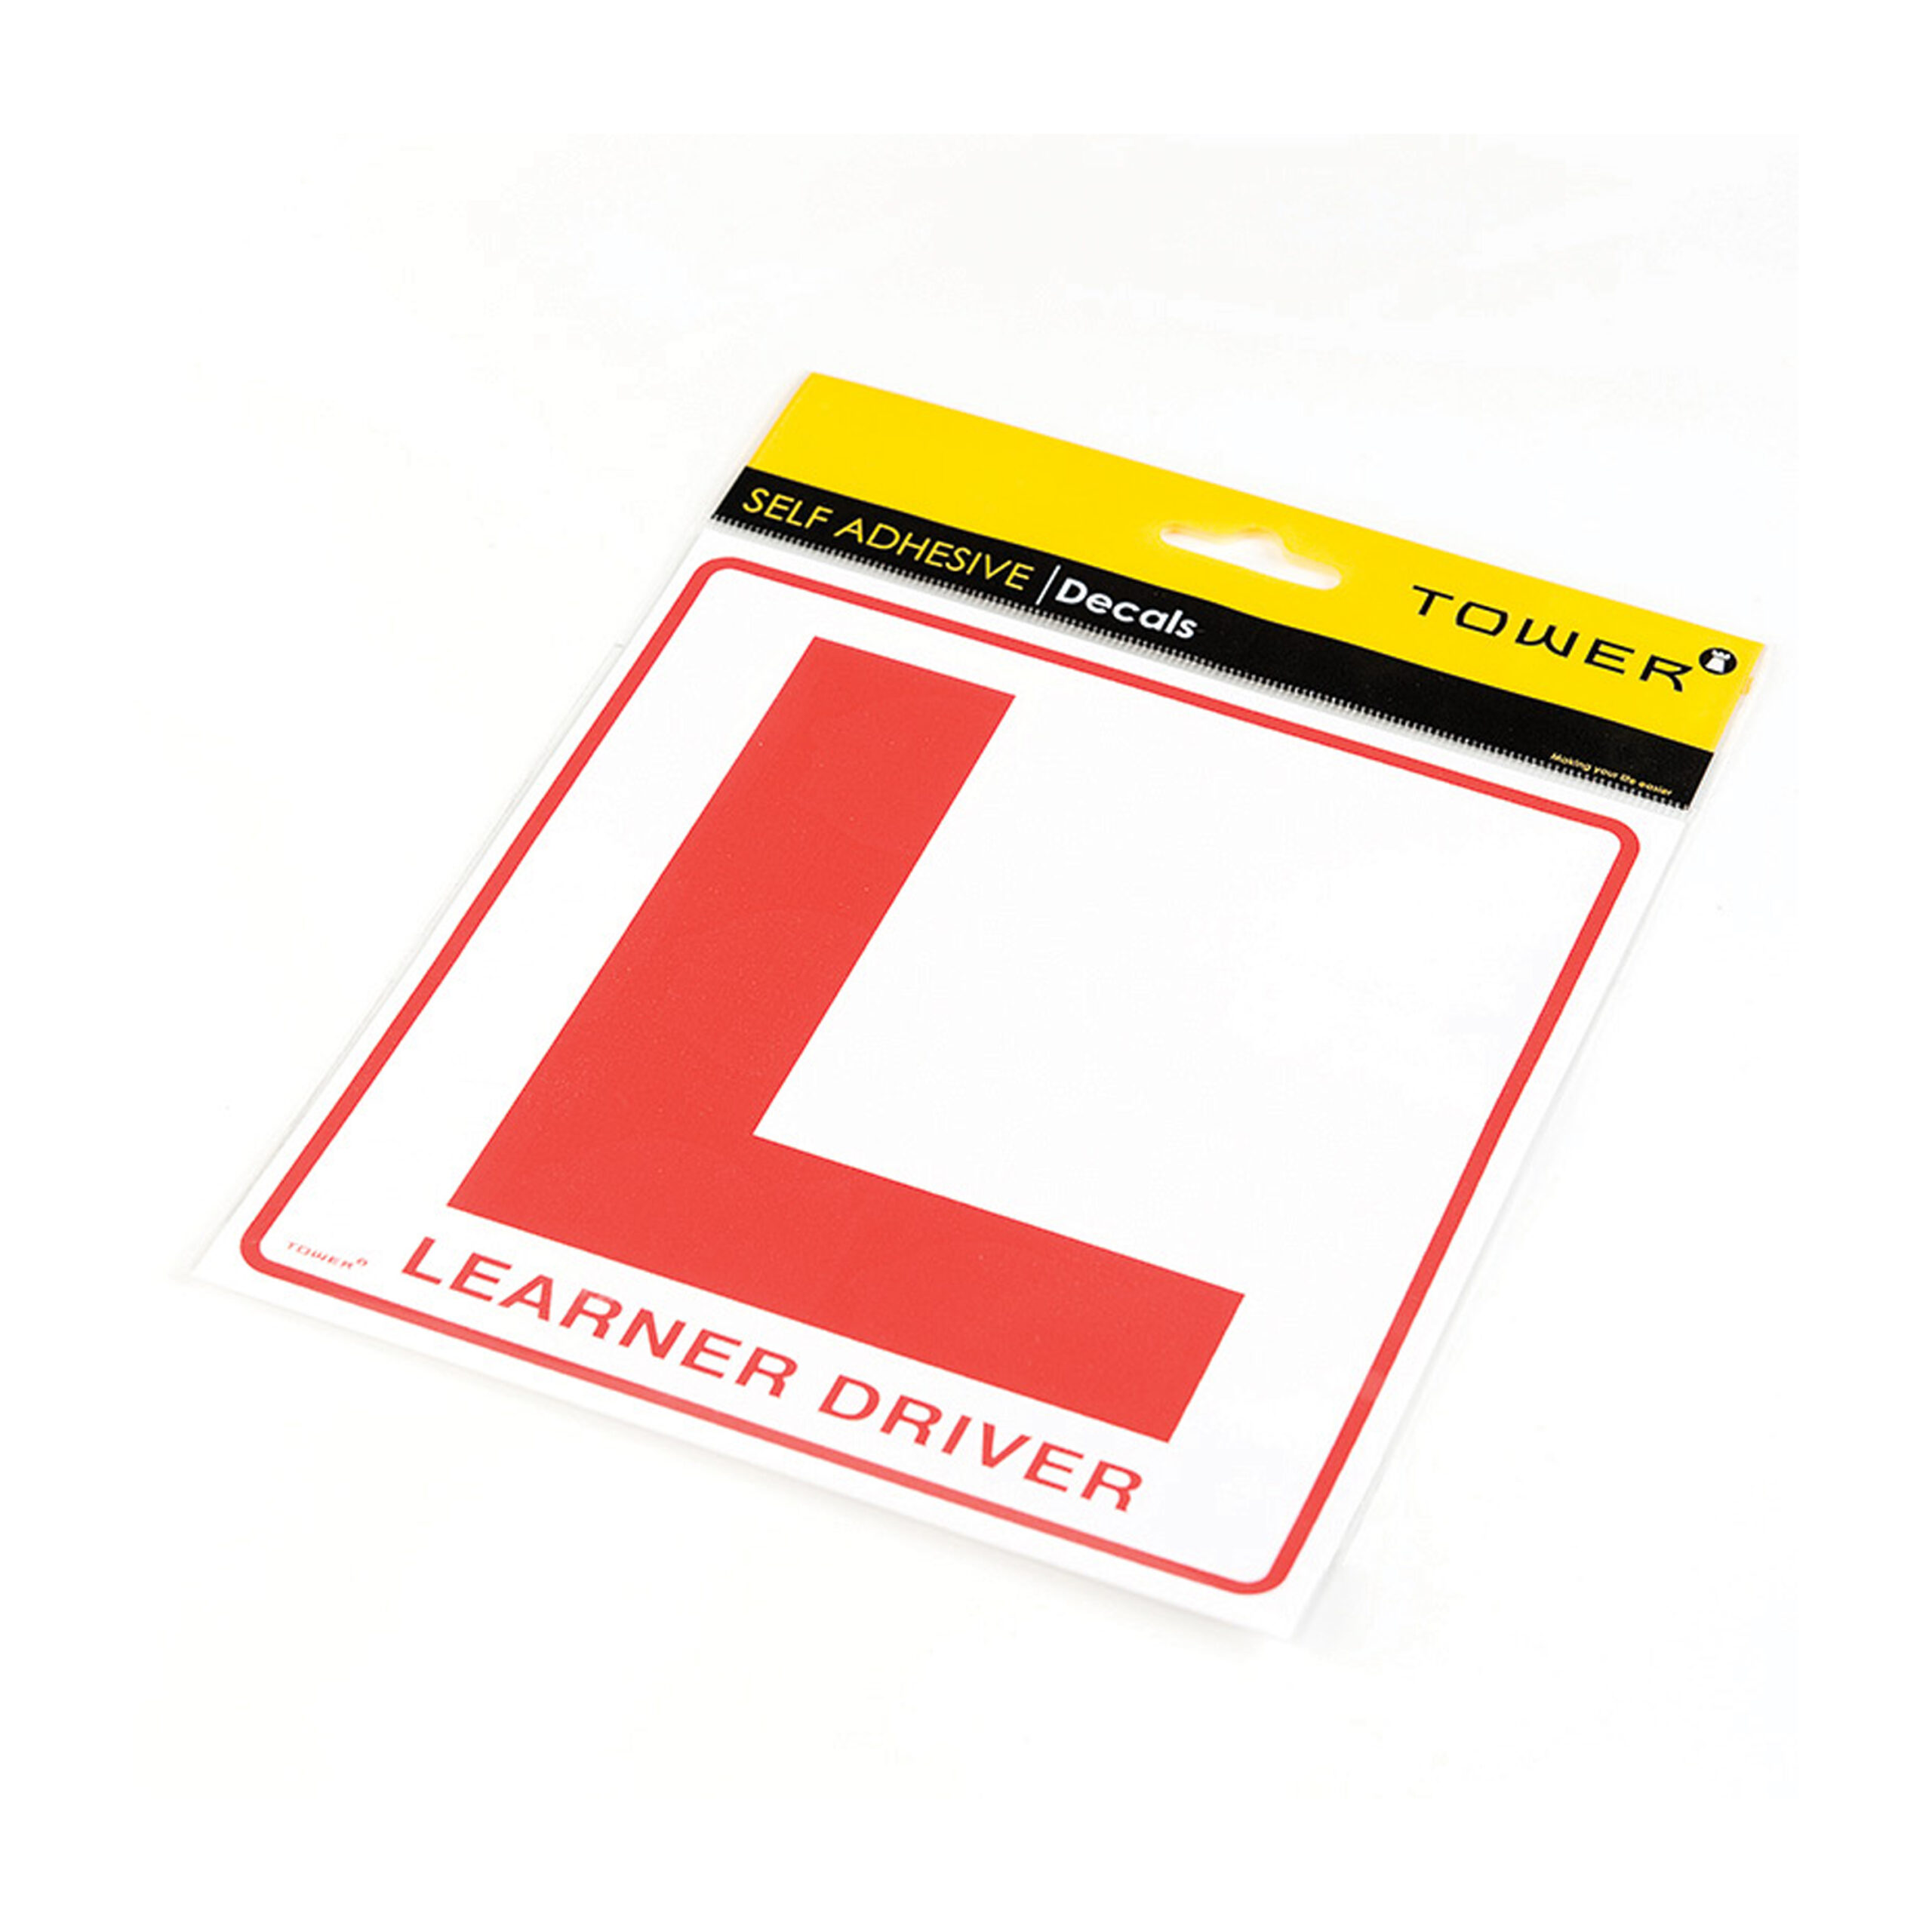 TOWER  "LEARNER
SIGN" DECAL 
162x172mm